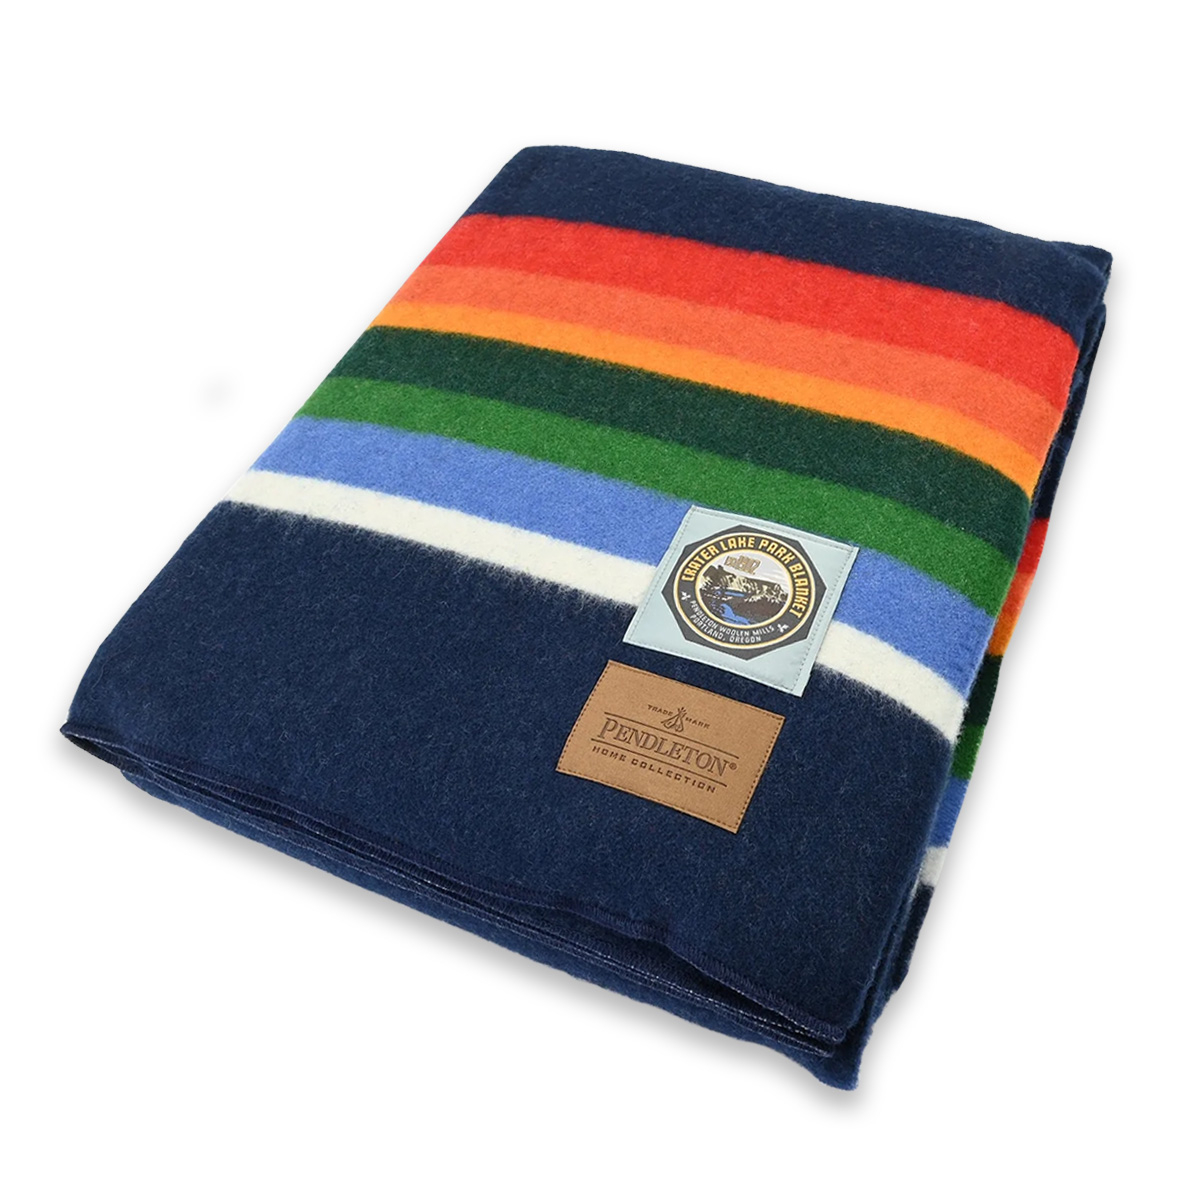 Pendleton National Park Full Blanket Crate Lake Navy, perfect blanket for chilly night